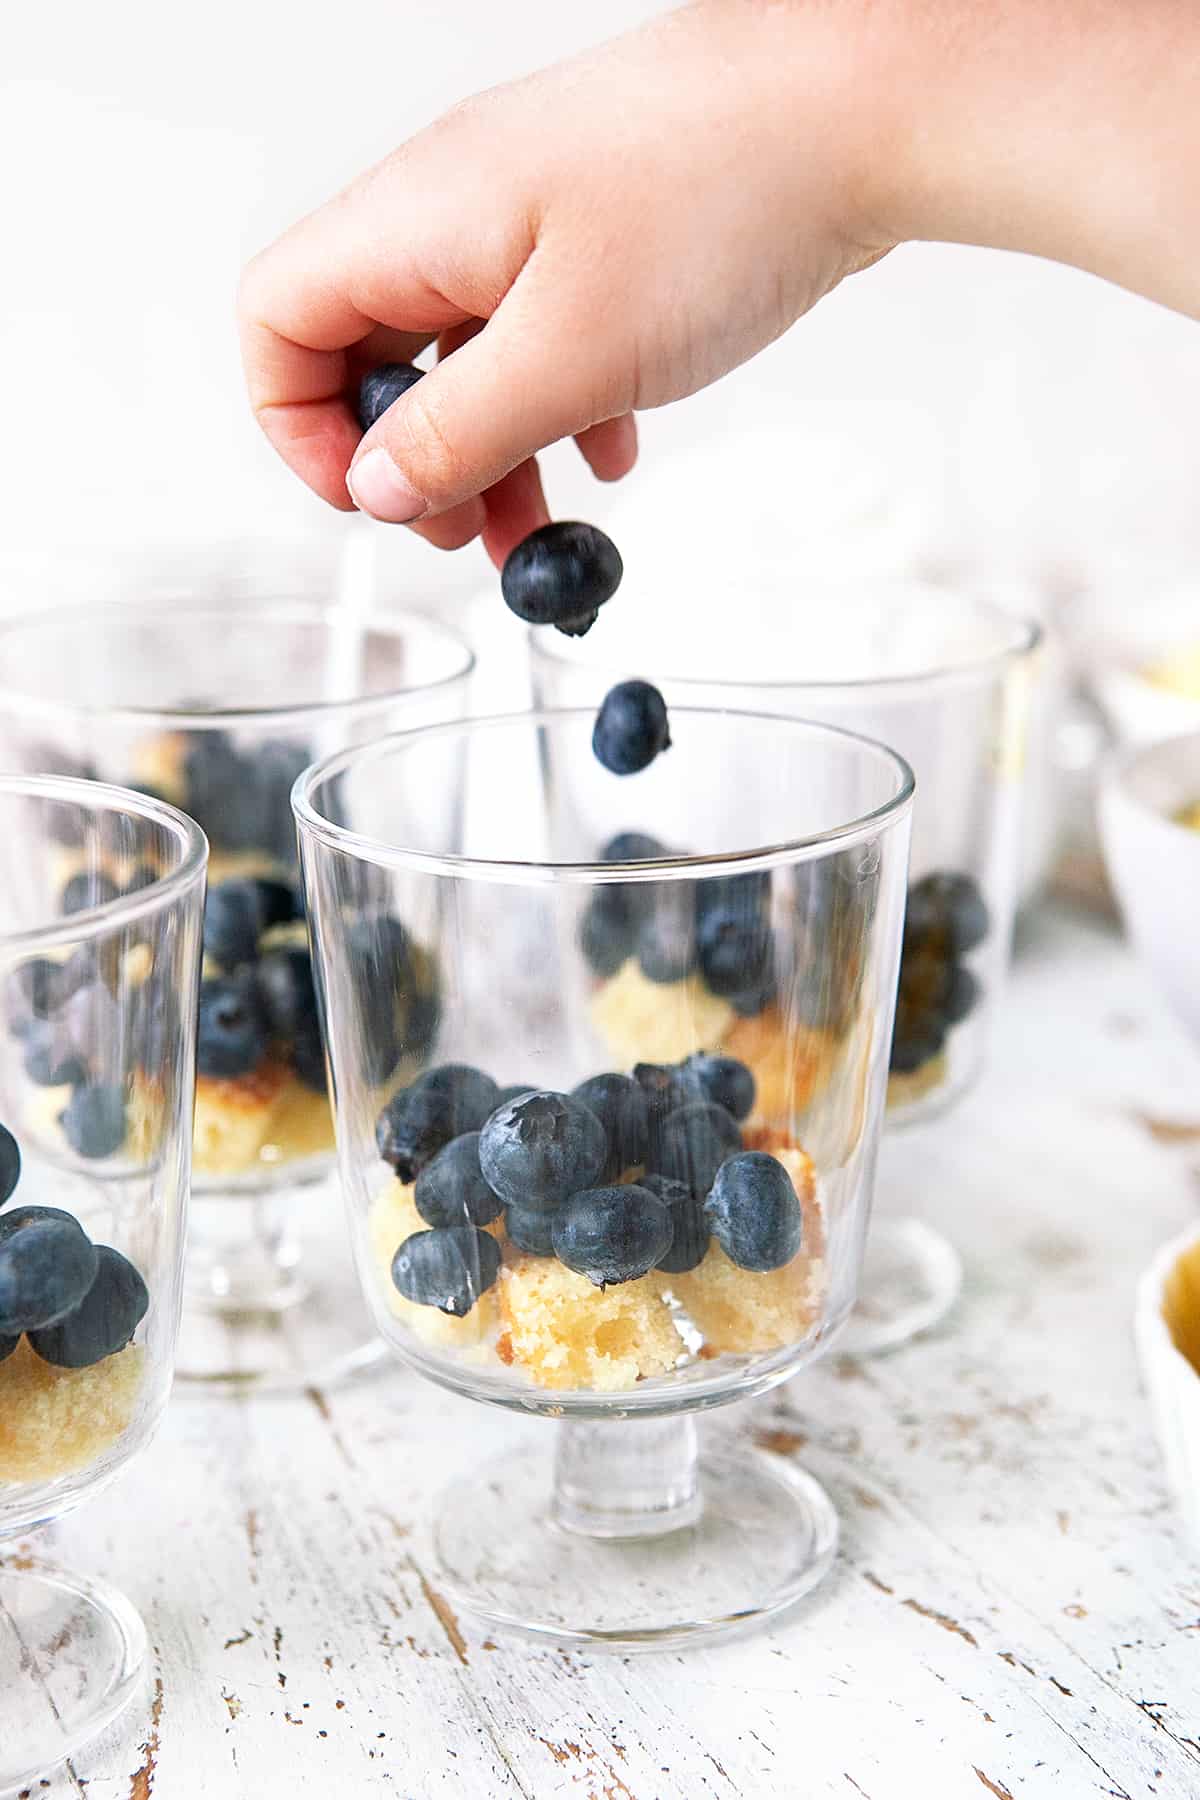 Tossing blueberries into a glass